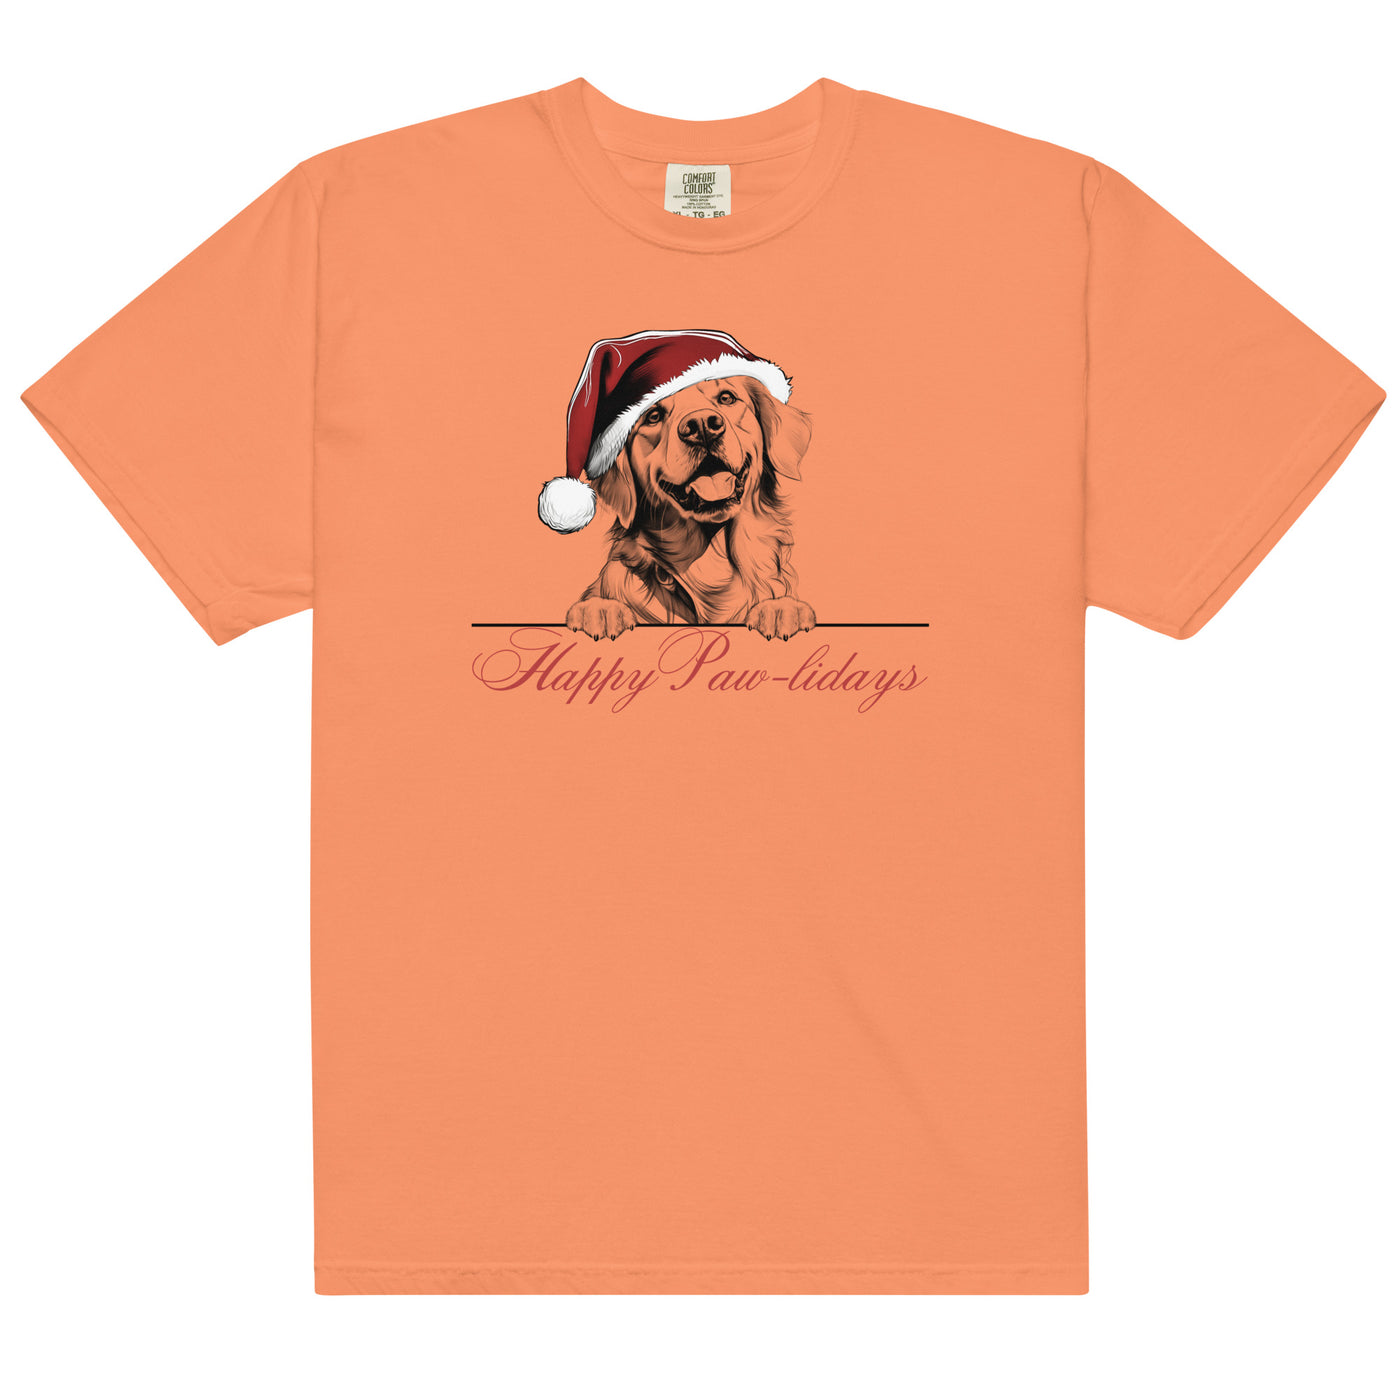 Make It Yours™ 'Happy Paw-lidays' Tee